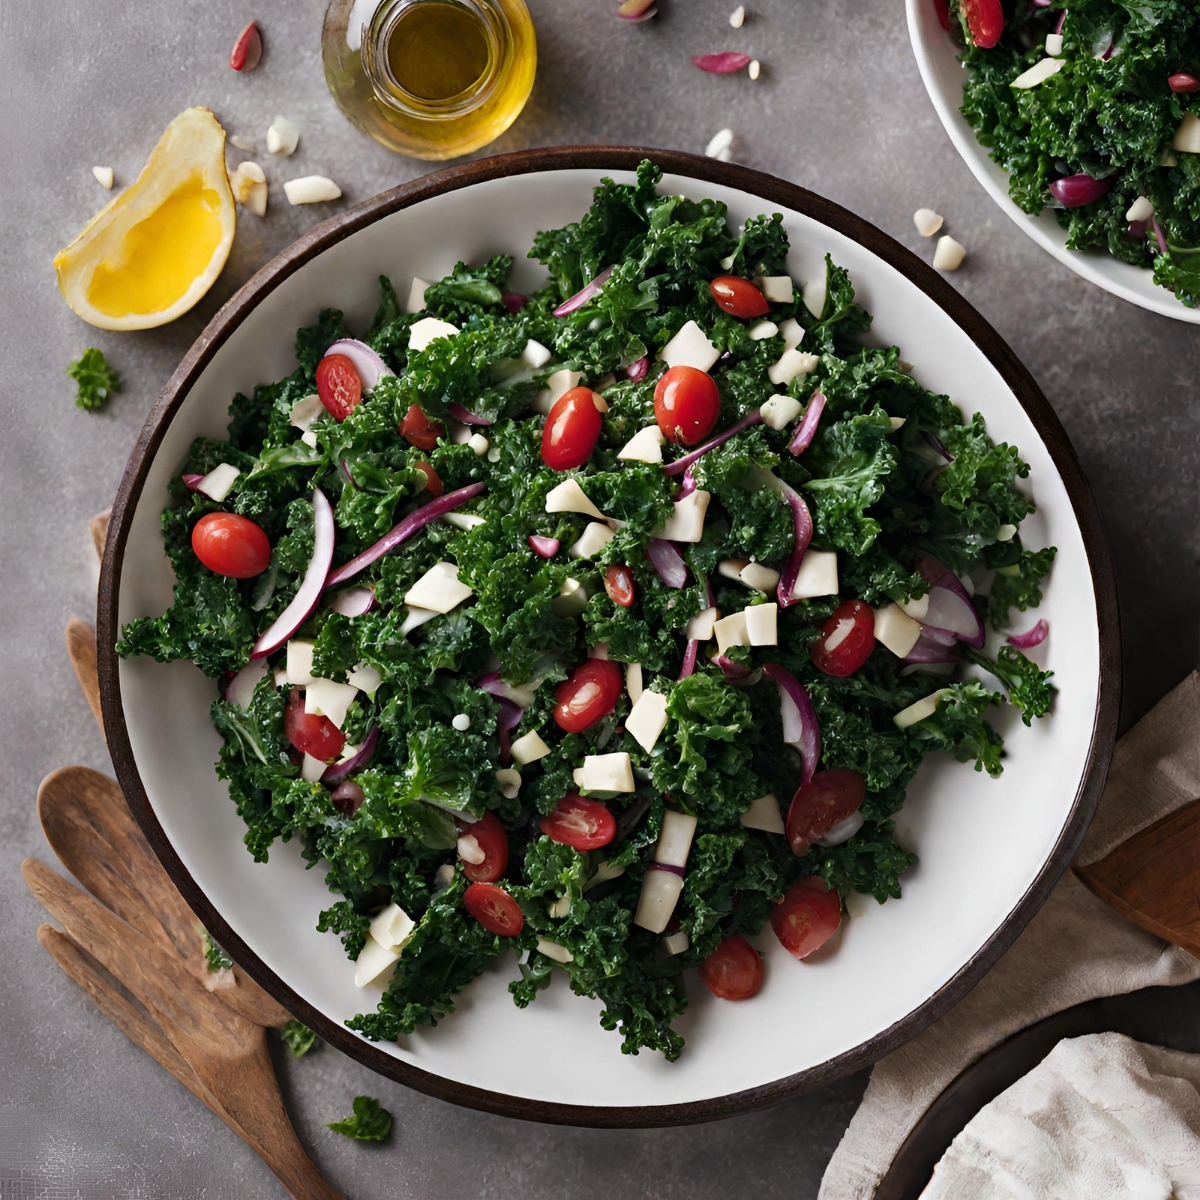 Kale Salad Recipe "Fresh Greens with a Tangy Dressing"